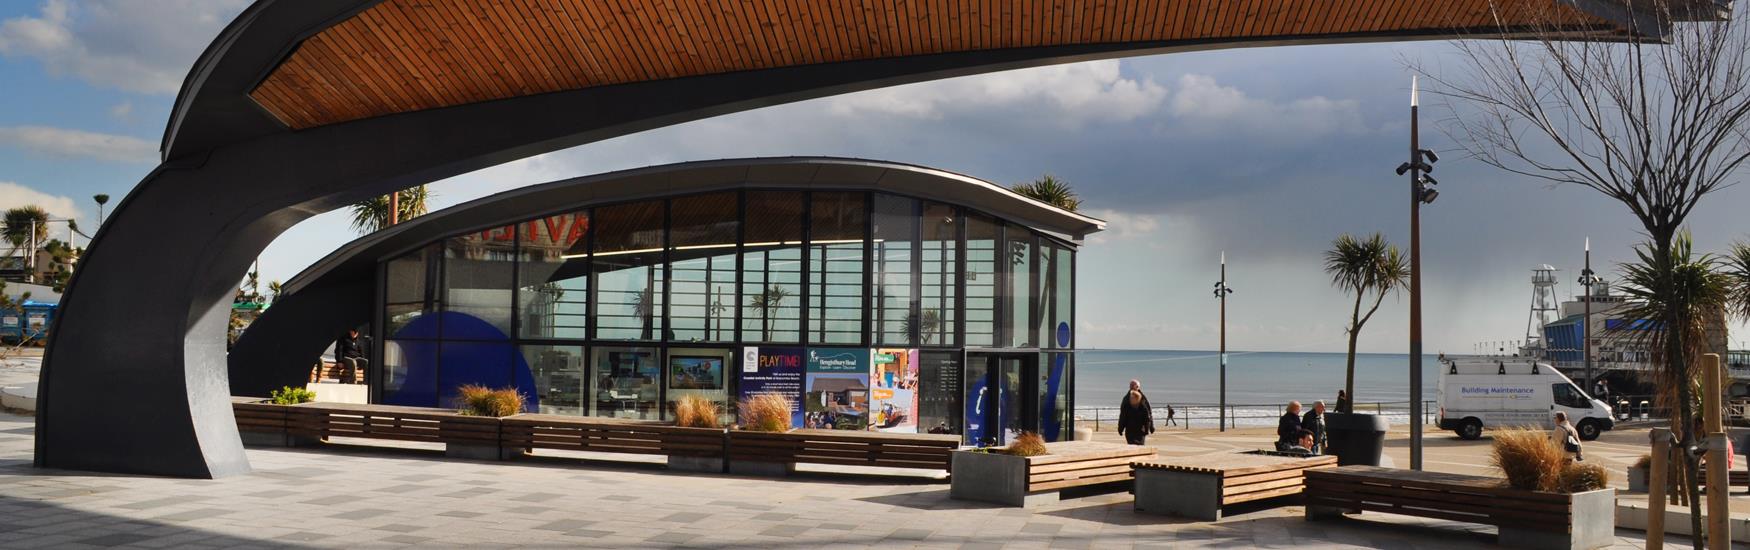 View of Pier Approach area with glass building and the pier and the sea in the background on a summer's day